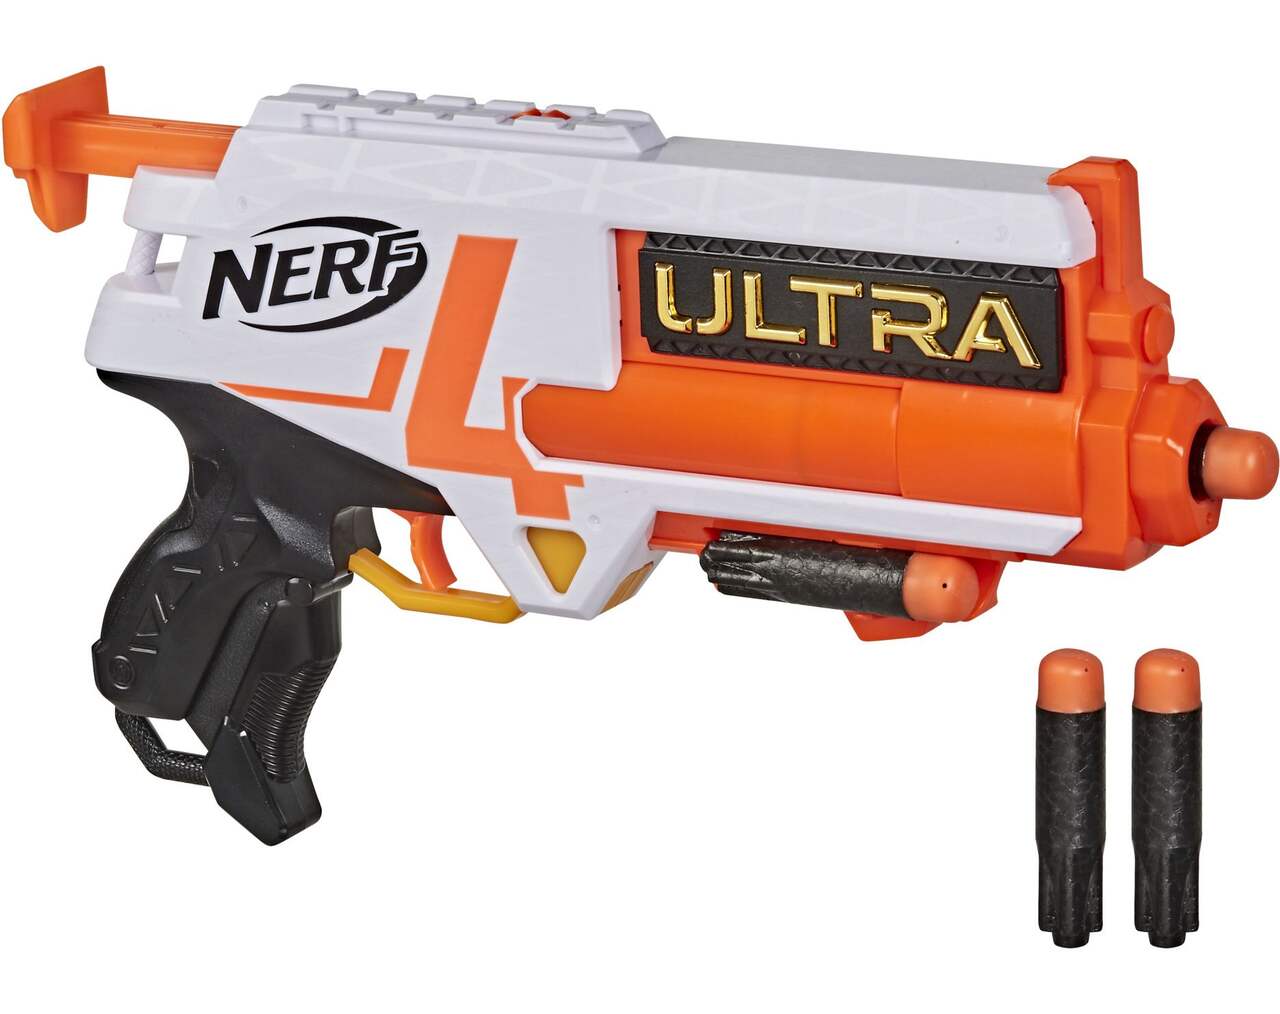 https://media-www.canadiantire.ca/product/seasonal-gardening/toys/toys-games/0506891/nerf-ultra-4-c278492a-1476-4a4a-b877-55187cd4bd24-jpgrendition.jpg?imdensity=1&imwidth=640&impolicy=mZoom